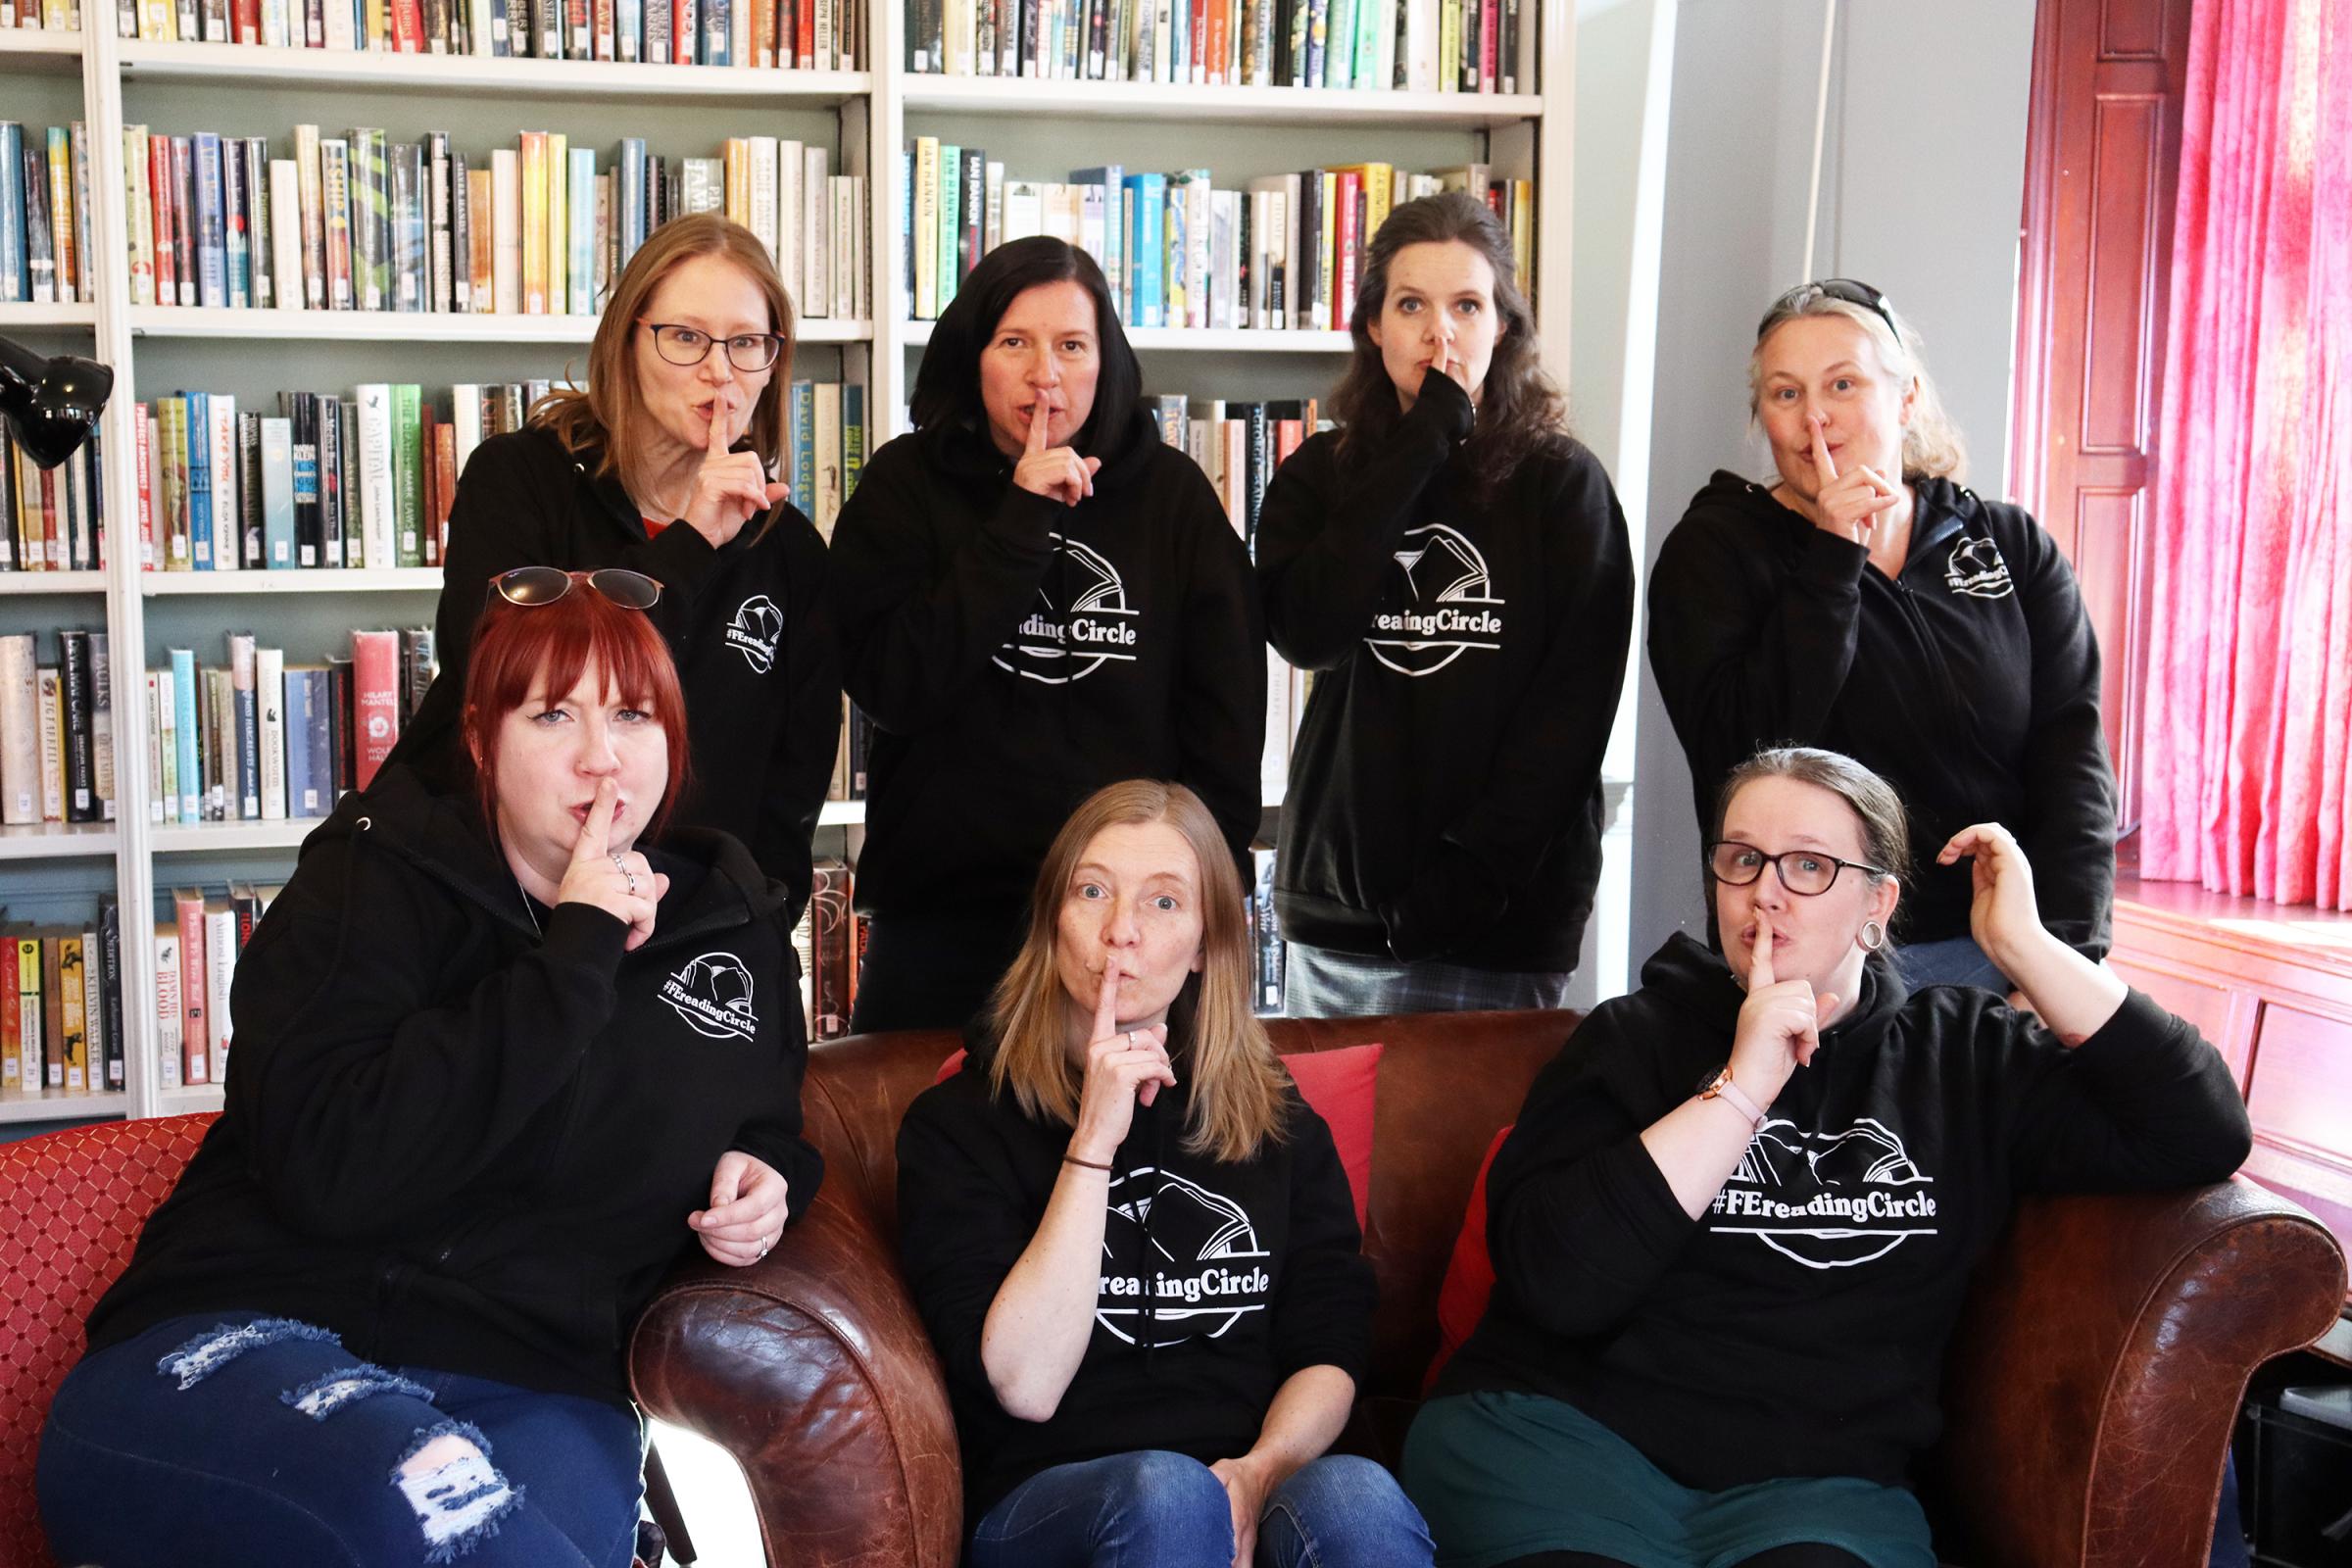 The FE Reading Circle in the Gladstone Room (Chloë Hynes front right and Kayte Haselgrove front left).